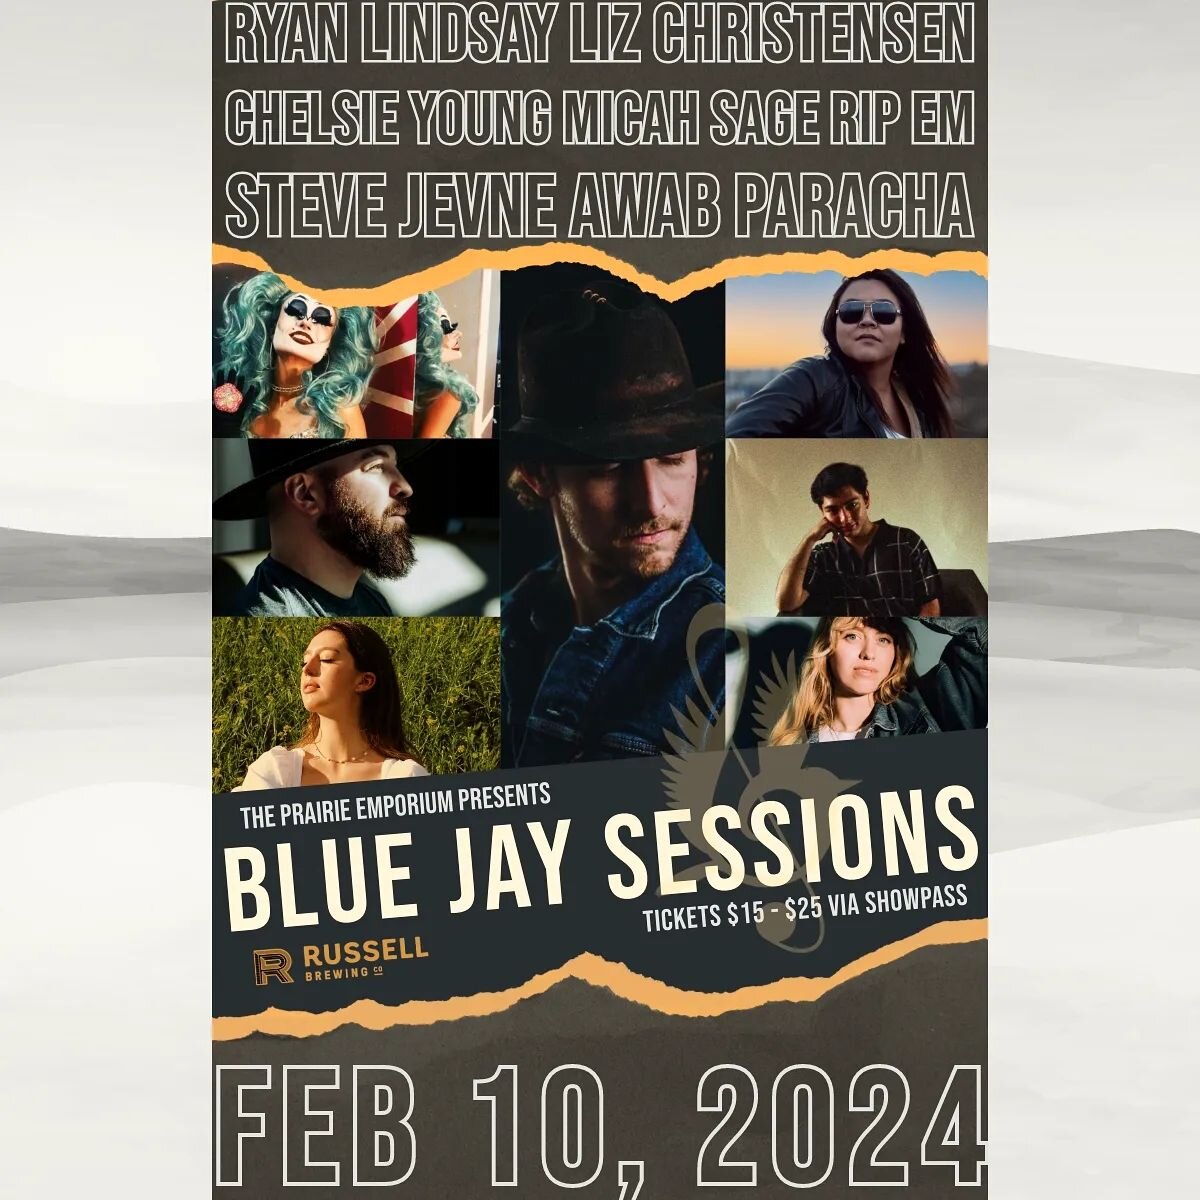 Come down to TPE next Saturday for @thebluejaysessions first event of the year, hosted by award-winning country singer @ryanrlindsay! 🎶🎶🎶

Hear original songs and stories from a mix of talented Alberta musicians while you enjoy sipping on @russell